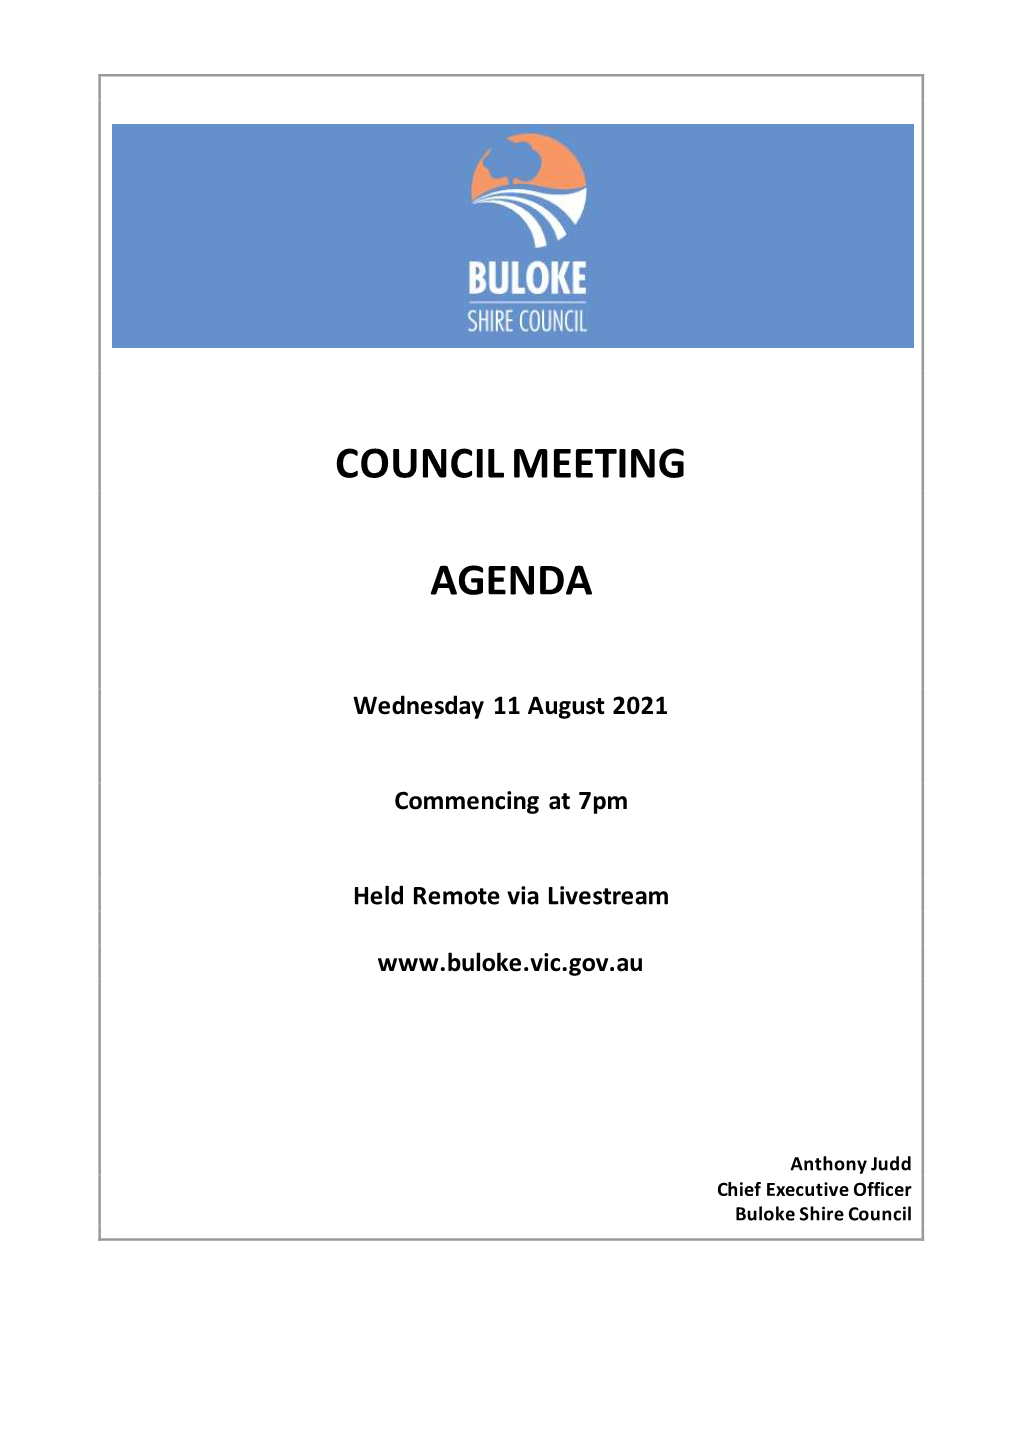 11 August 2021 Council Meeting